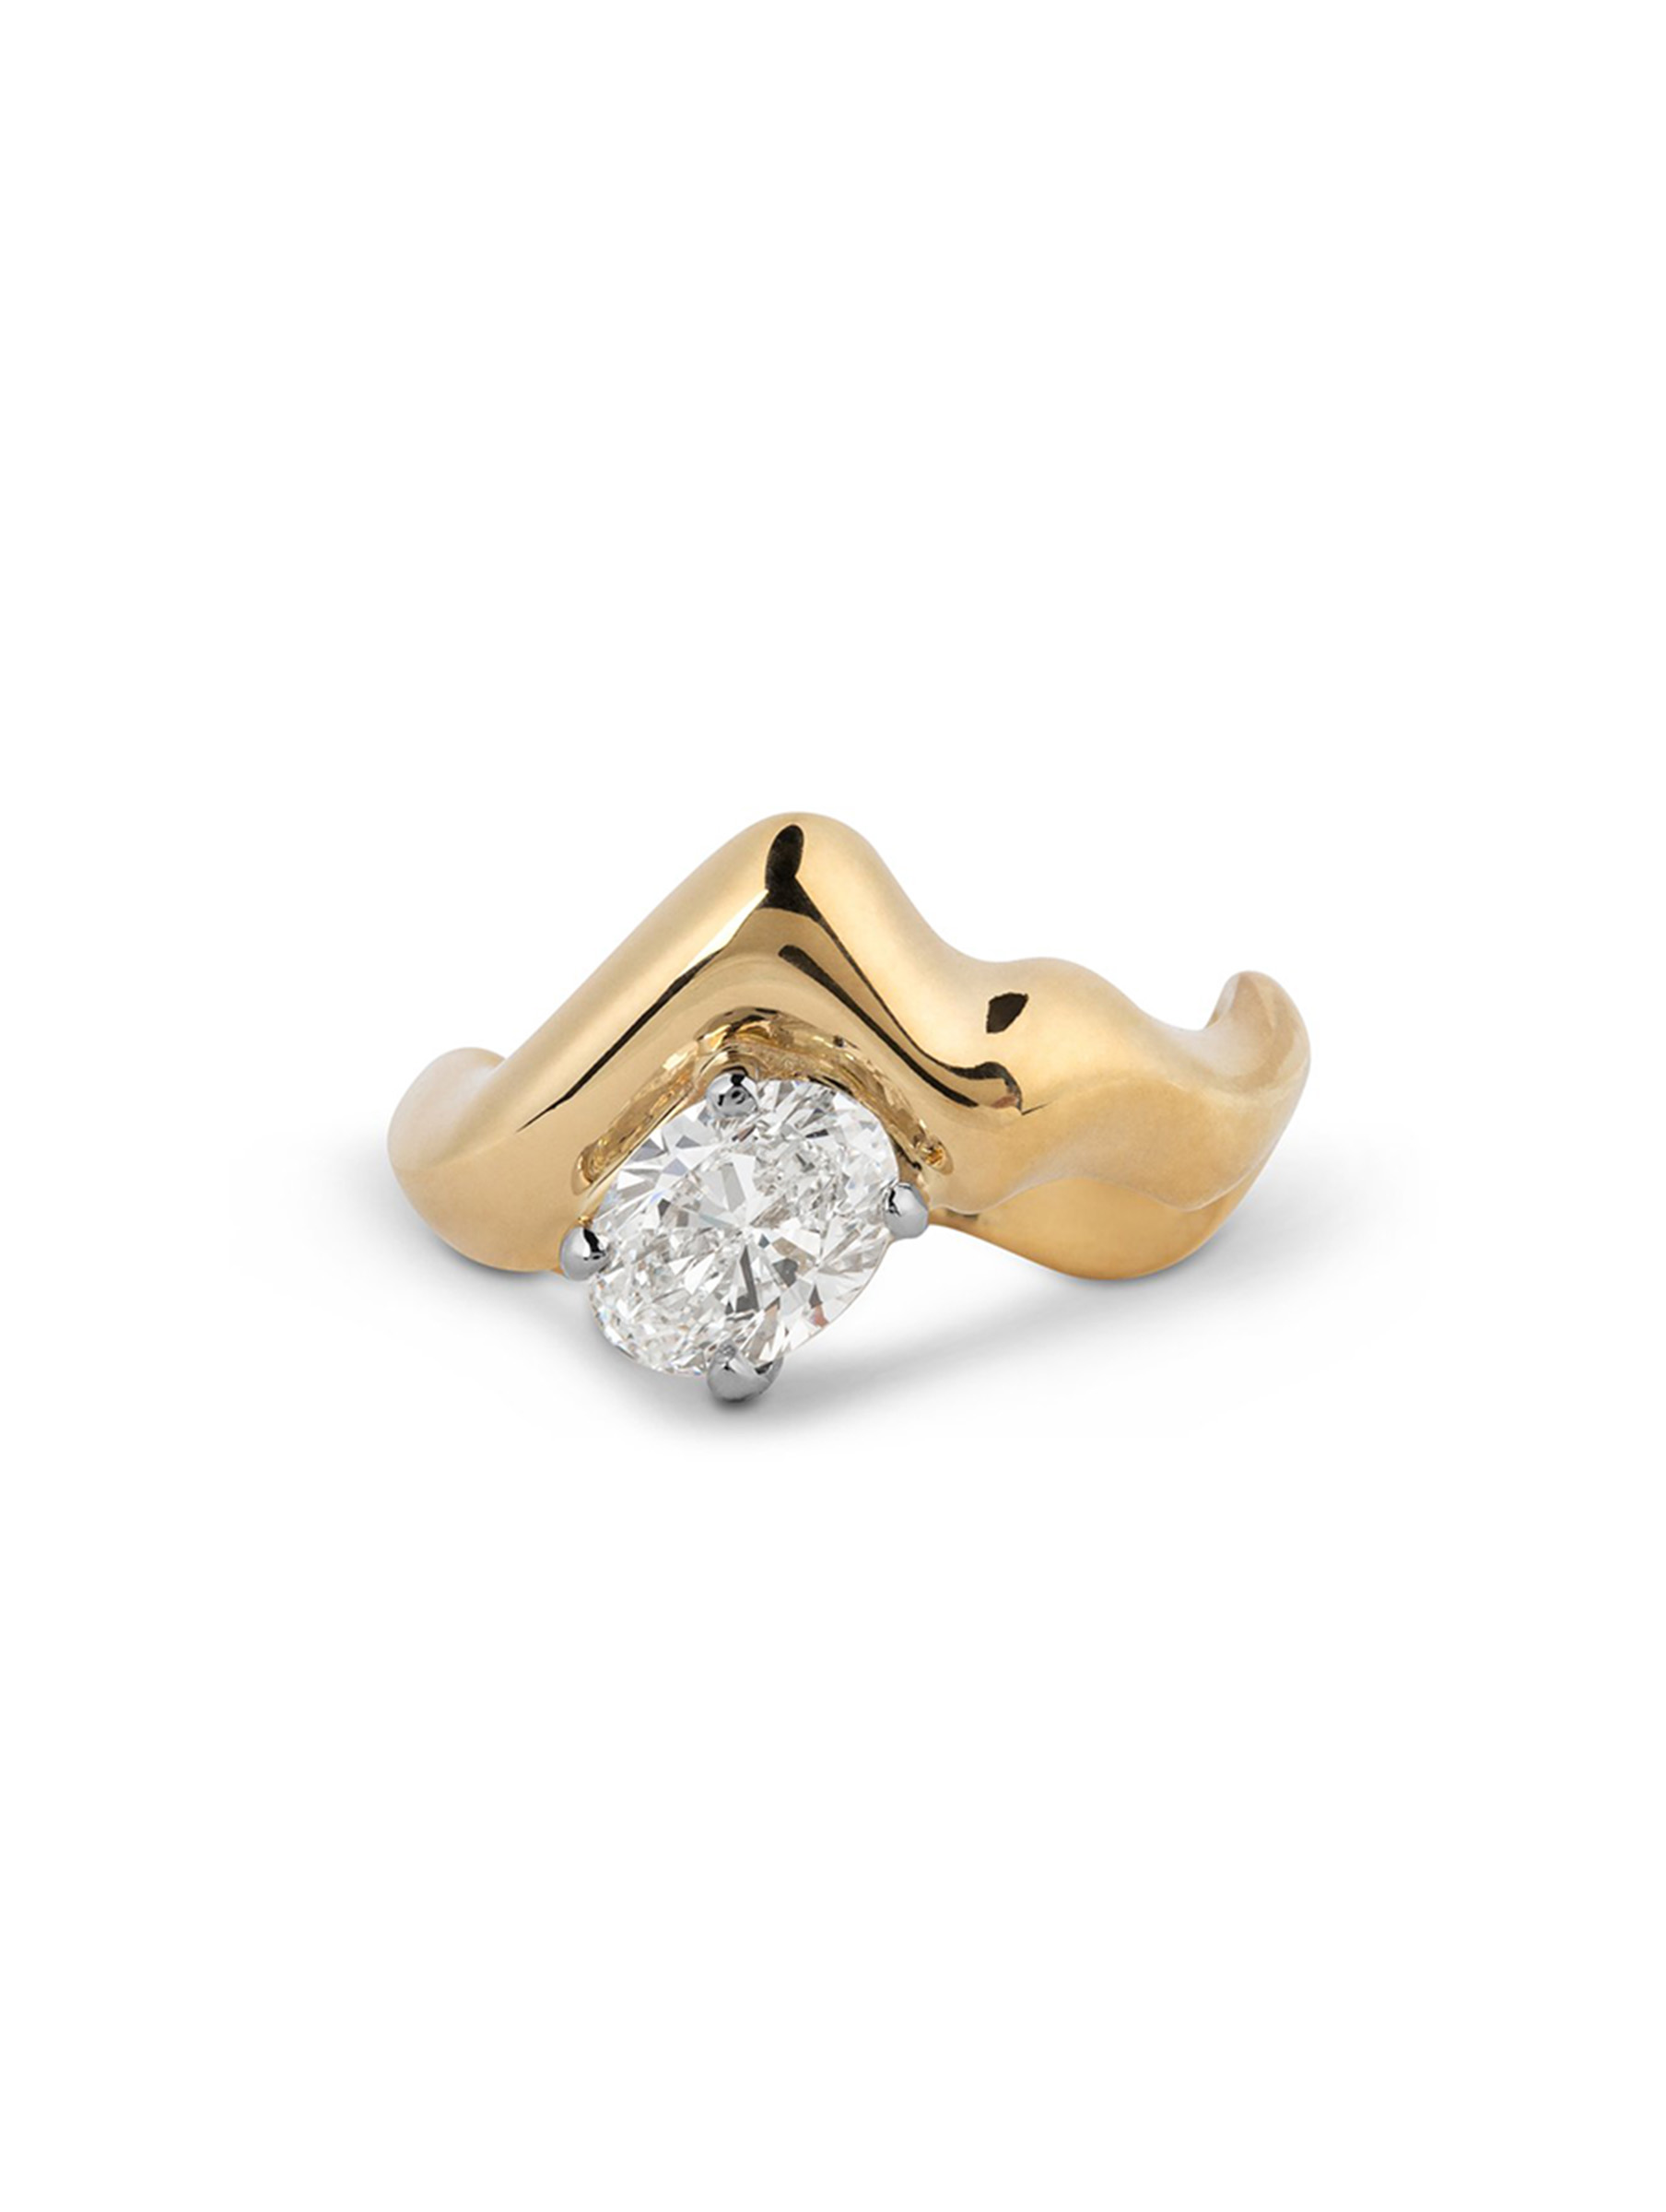 Molten shape gold band from Jessie Thomas Jewellery